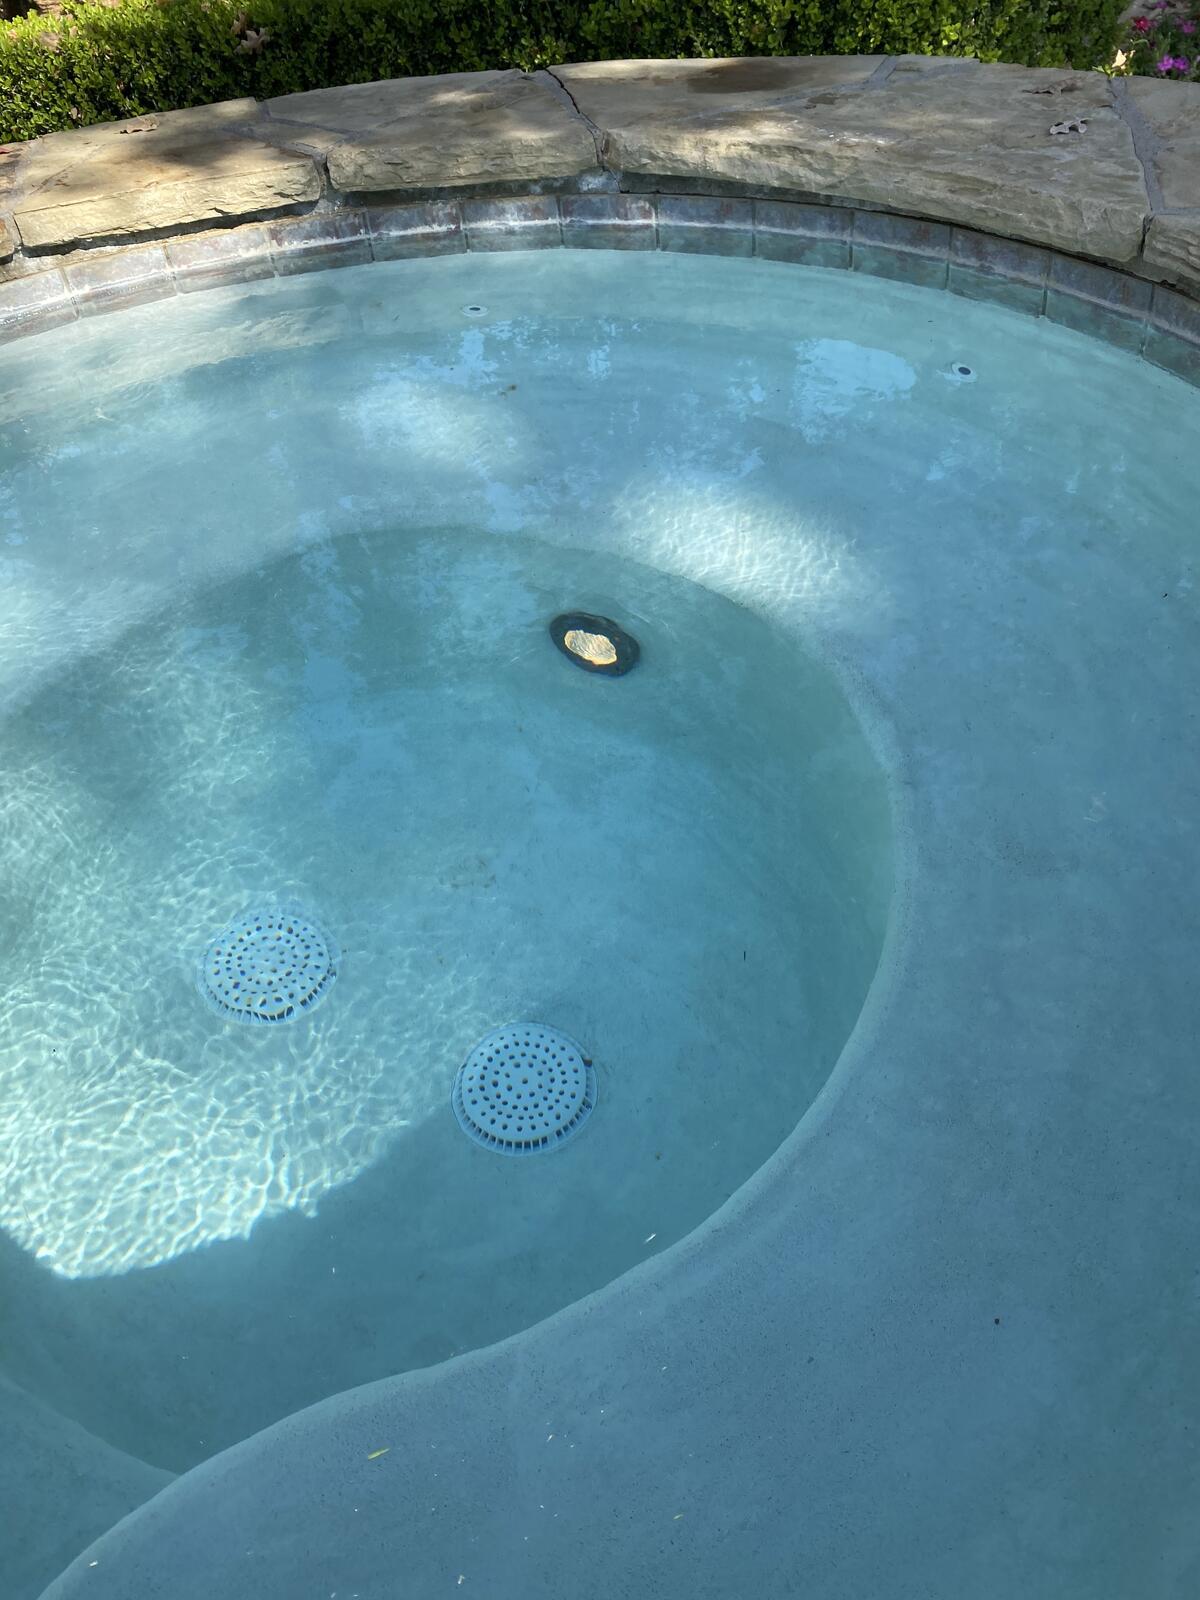 Kingdom’s pool and spa services 12105 Linkhill Dr, Aledo Texas 76008